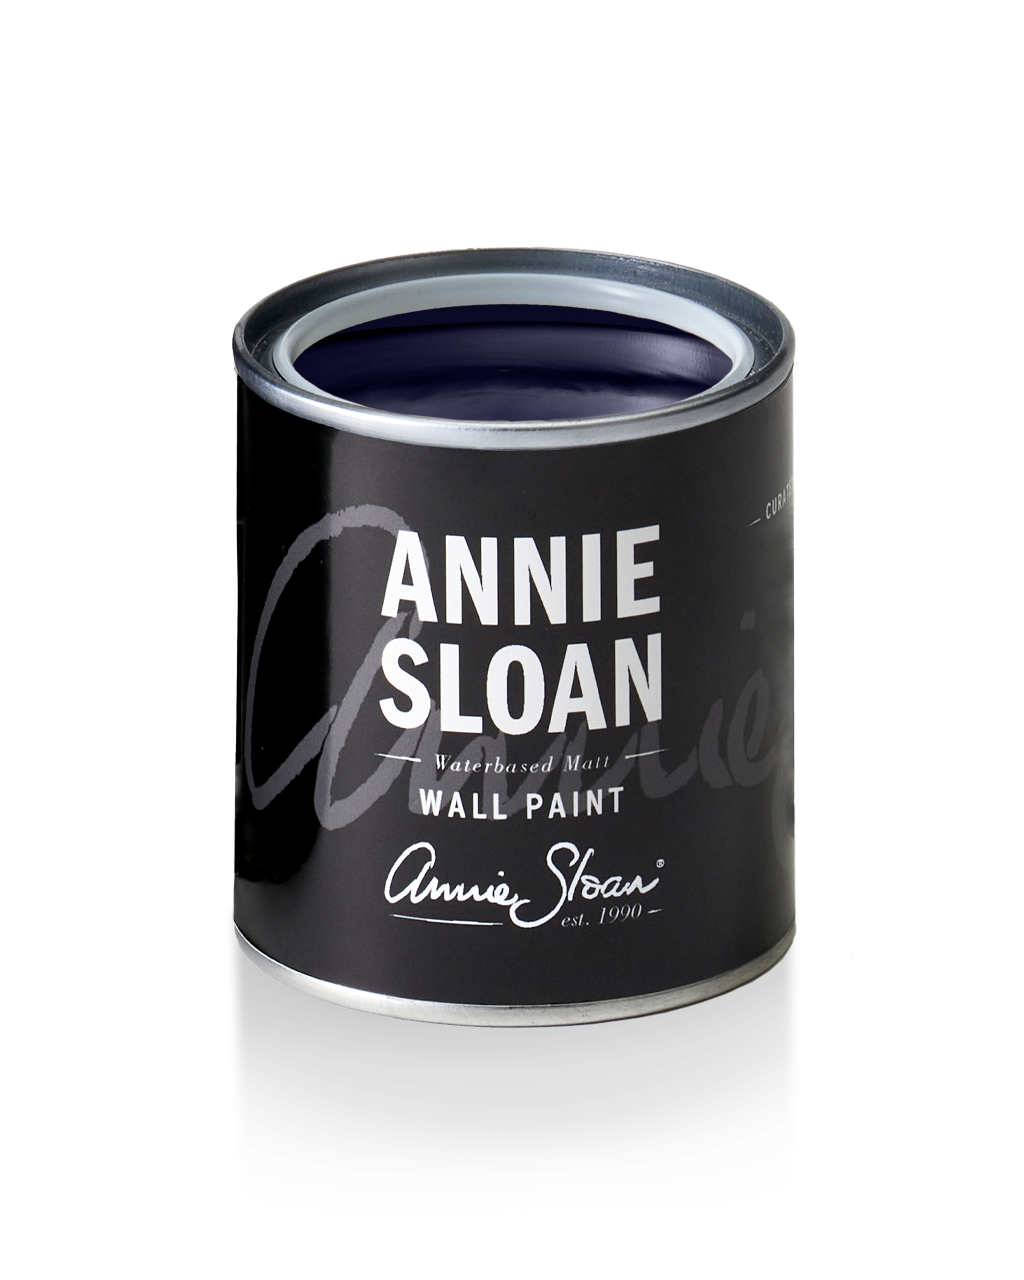 120ml tin of Oxford Blue wall paint by Annie Sloan